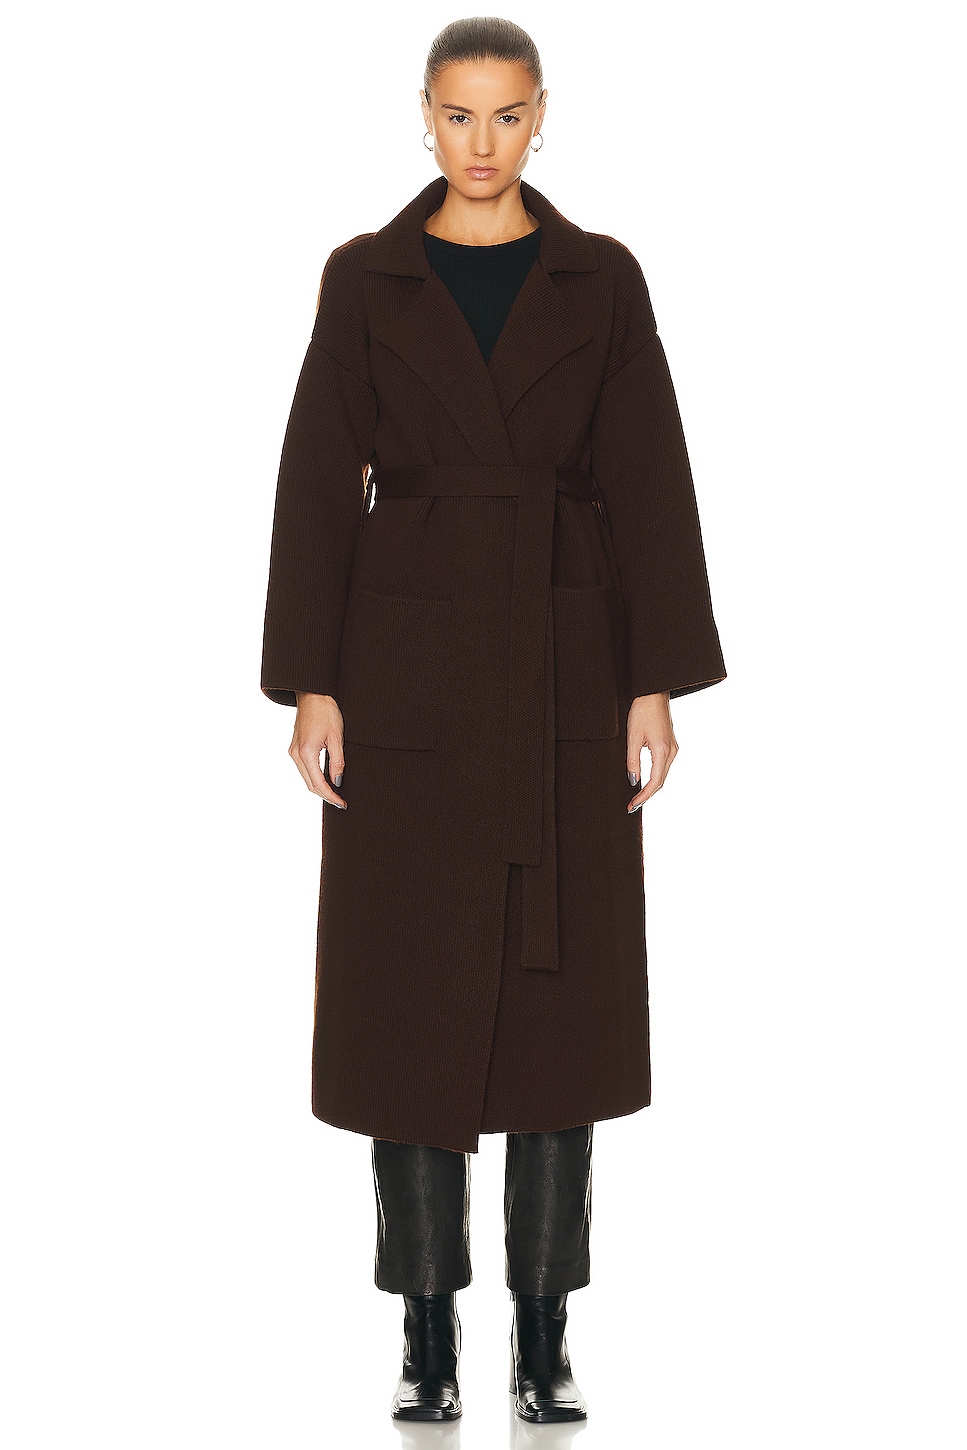 Image 1 of NOUR HAMMOUR Claire Extra Long Belted Knit Cardigan in Marron